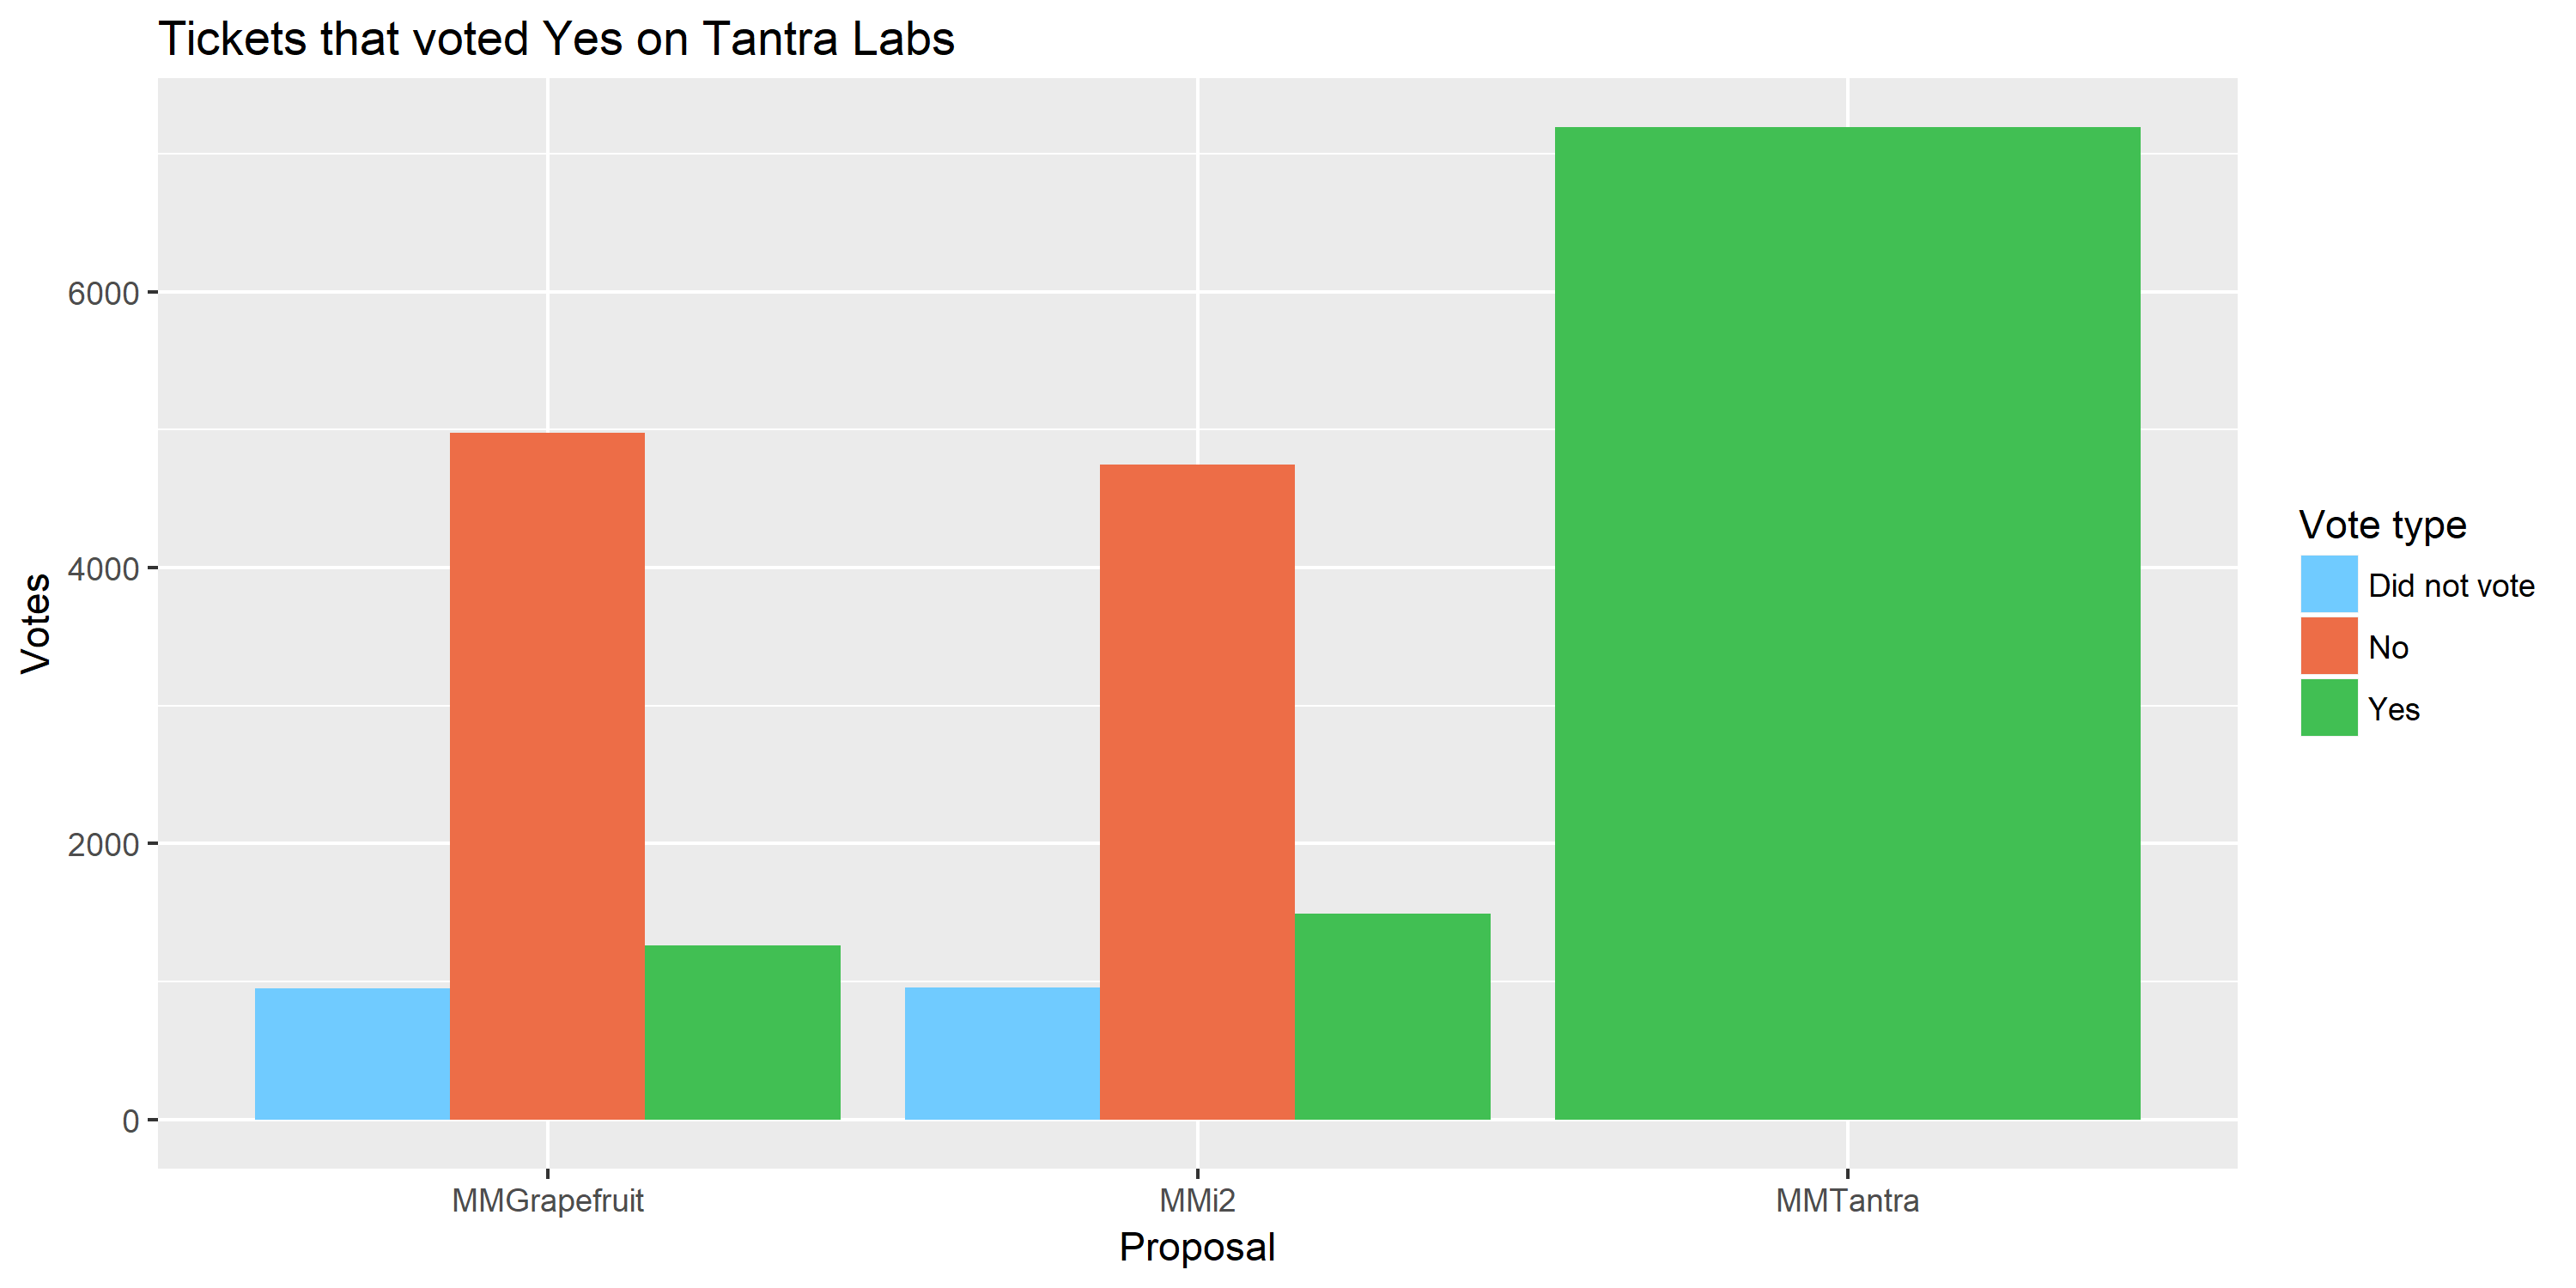 Tickets that voted Yes on Tantra Labs